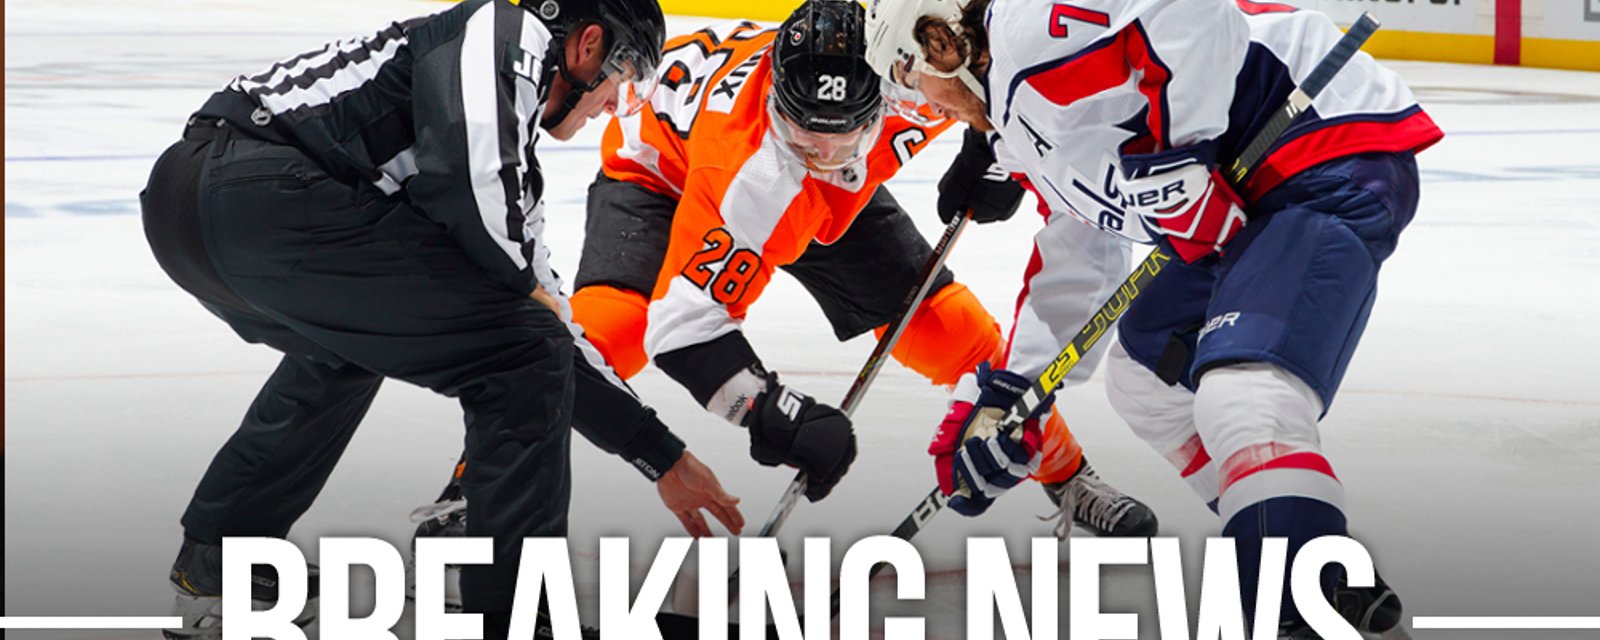 Report: Flyers and Capitals game to be postponed